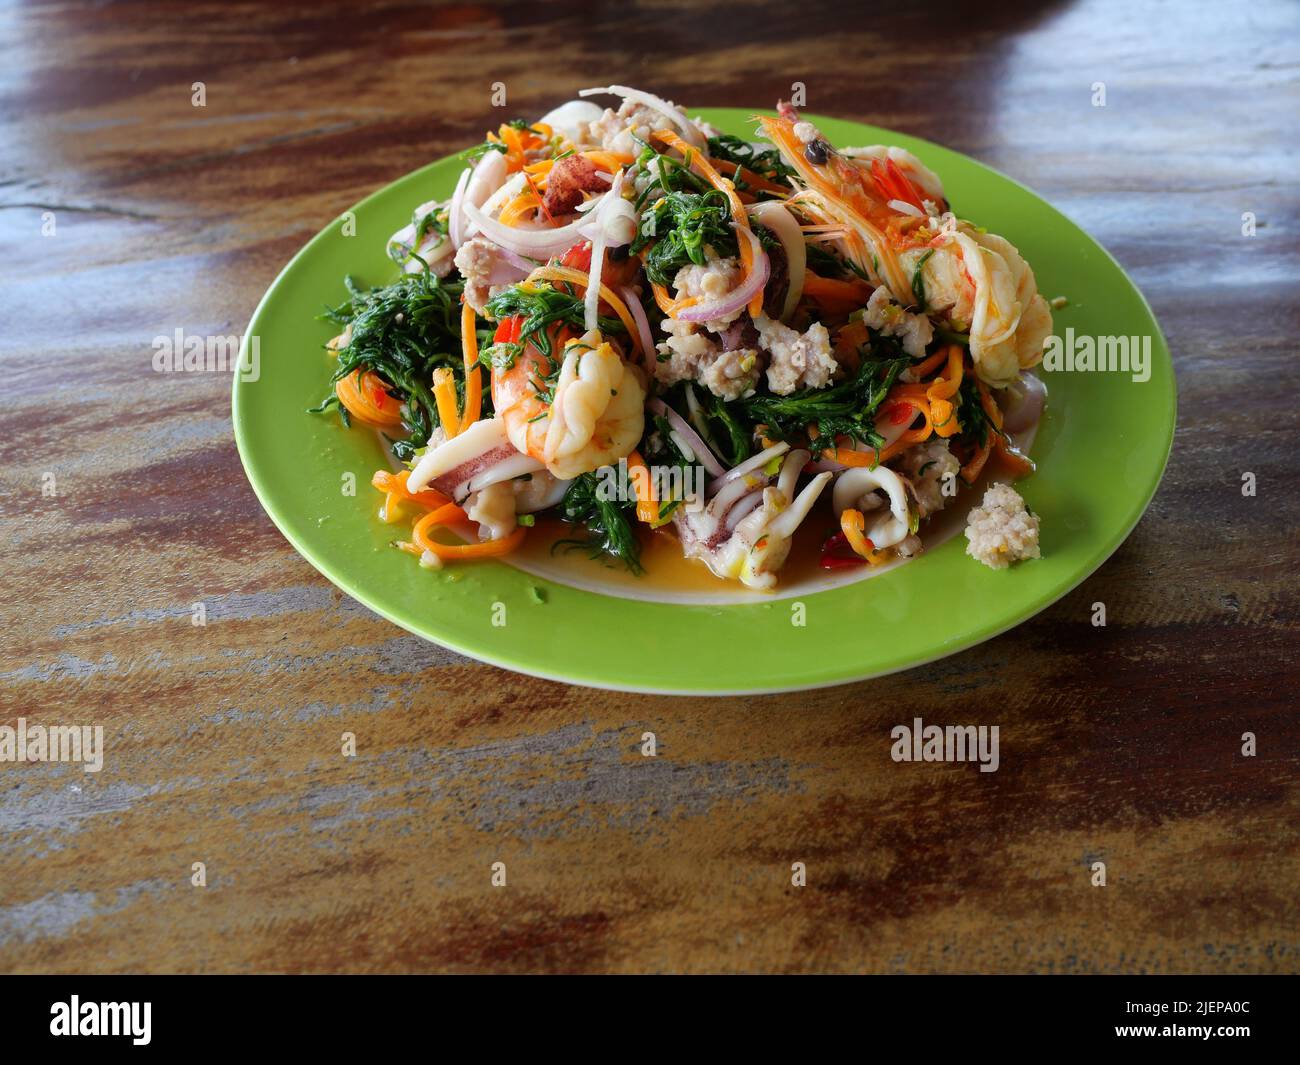 Thai cuisine spicy salad with Boiled Seablite ( Suaeda maritima ) leaf with squid and shrimp in green dish on brown wooden table, Seafood in Thailand Stock Photo